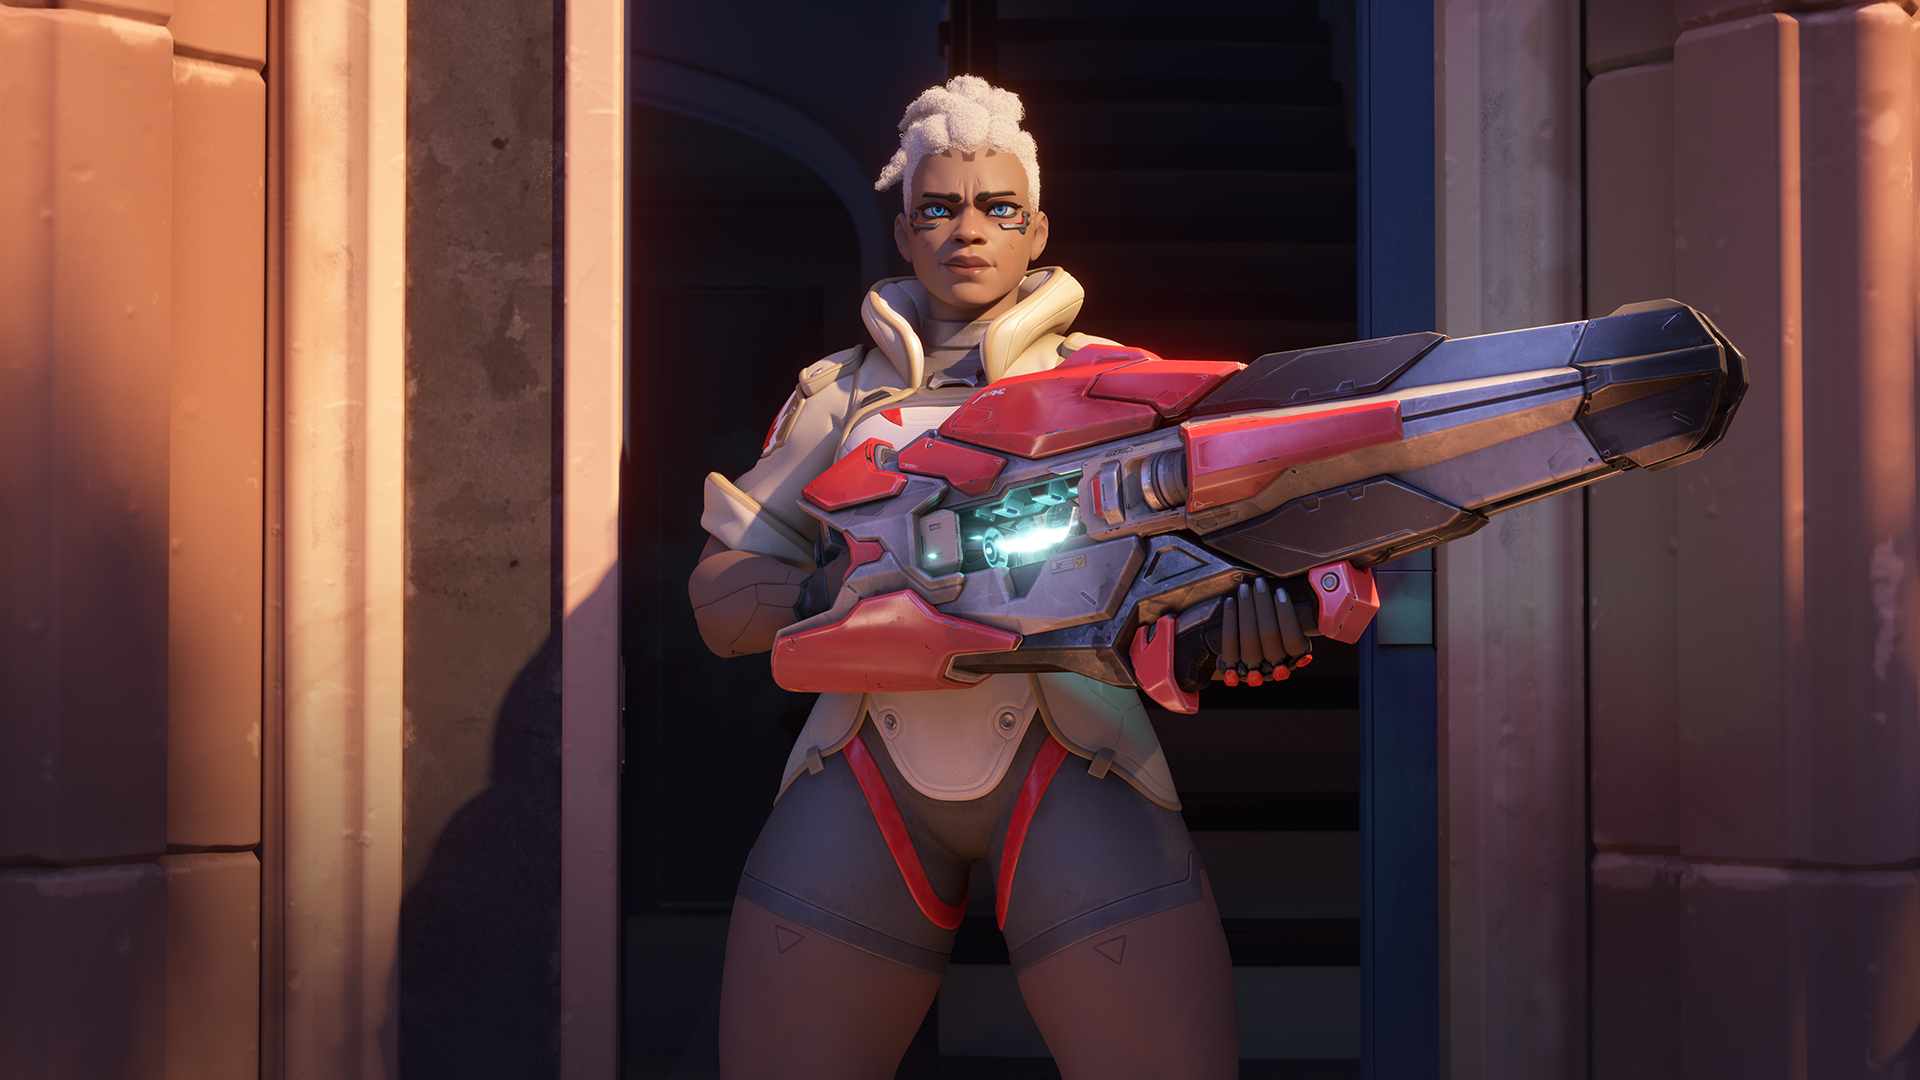 Sojourn from Overwatch readies her railgun as she steps out of her door in the Overwatch 2 cinematic “Calling.”